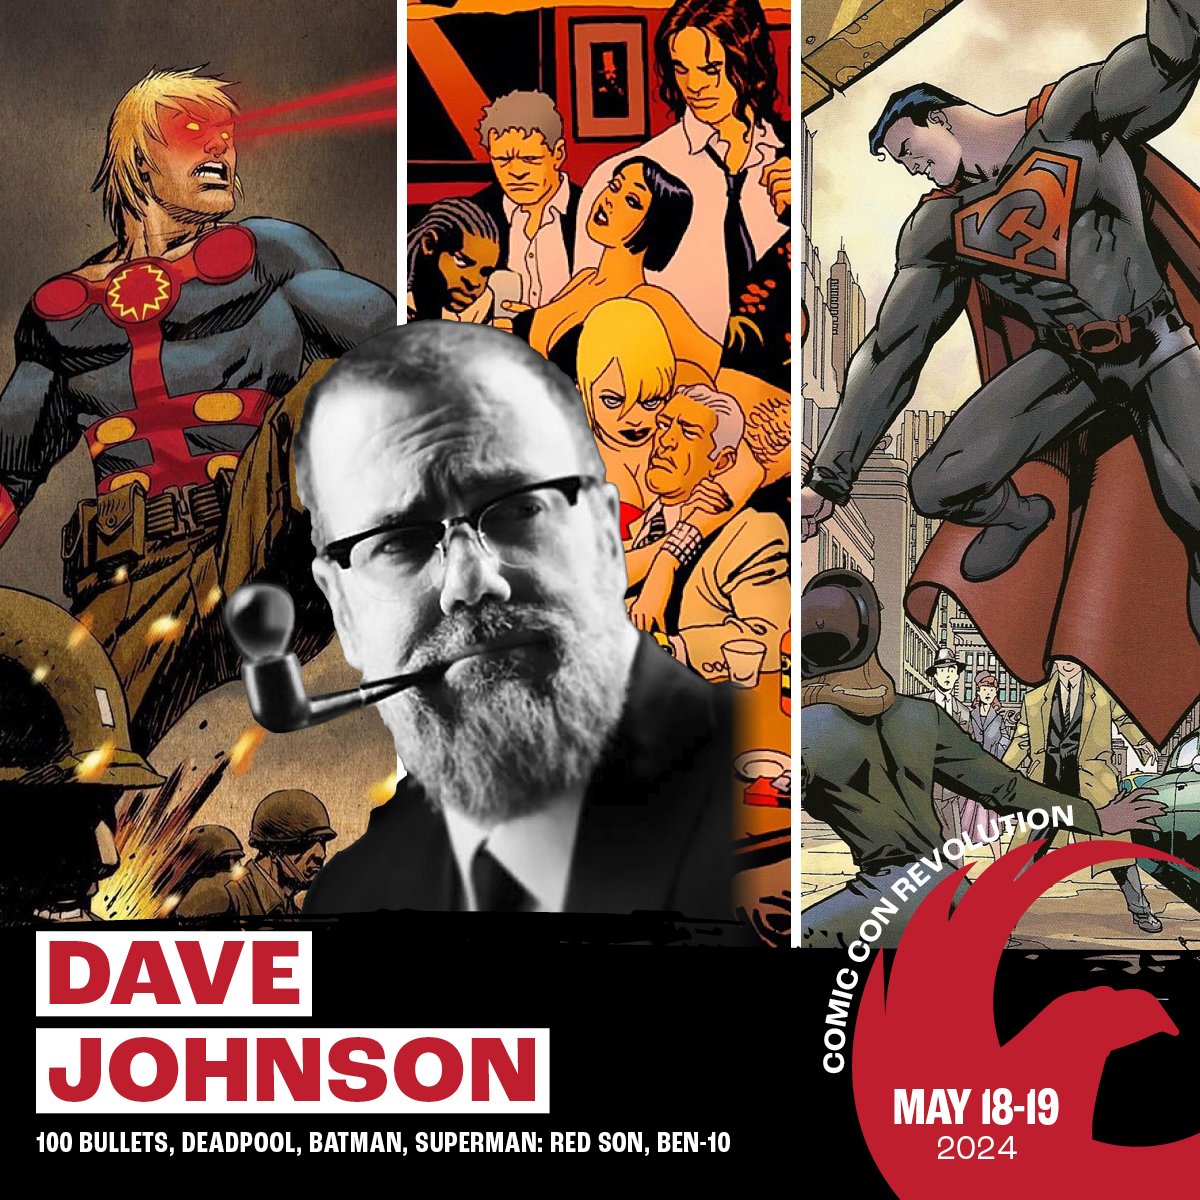 💥 Iconic artist @TheDevilpig is coming to #ComicConRevolution! Don't miss him as part of our fan favorite #ArtistAlley all weekend. Tix: CCRTix.com #comiccon #inlandempire #ontariocalifornia #socal #davejohnson #artist #coverartist #supermanredson #100bullets